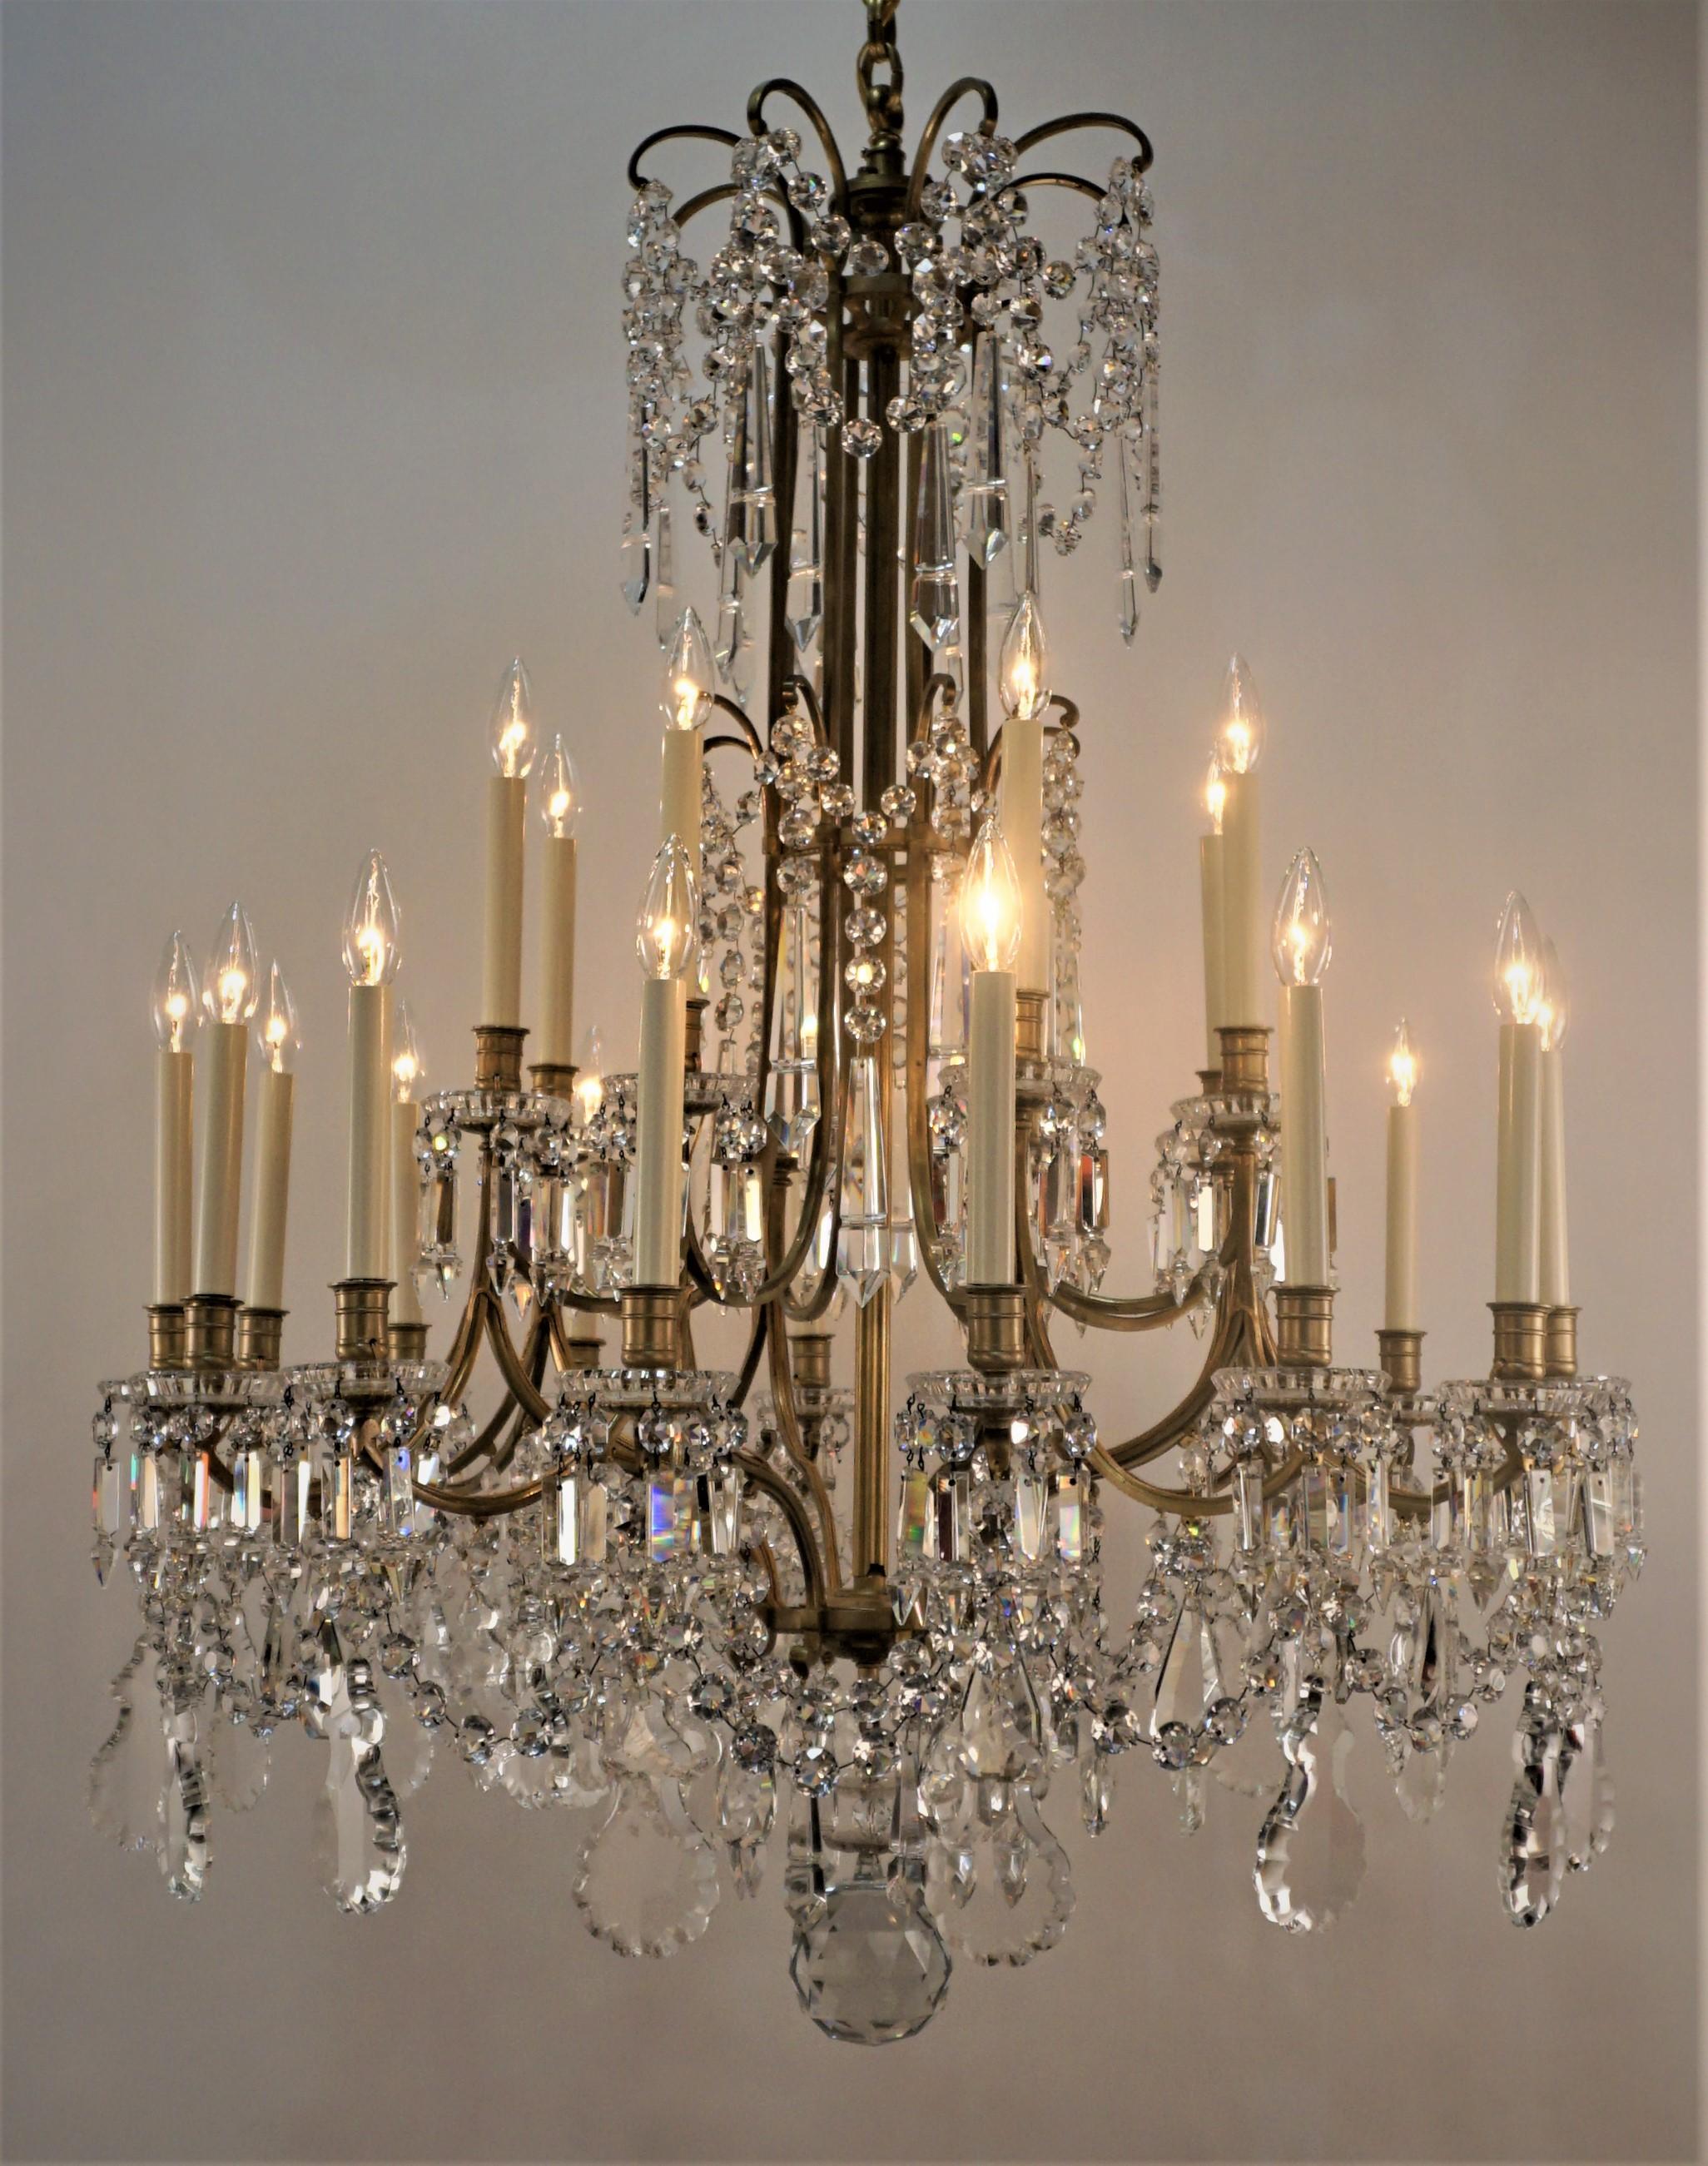 A rare and large 19th century 24 chandelier with beautiful bronze frame decorated with beautiful hand polished sparkling crystals. This exquisite, marked Baccarat crystal chandelier is example of superiority of 19th-century lighting
This chandelier